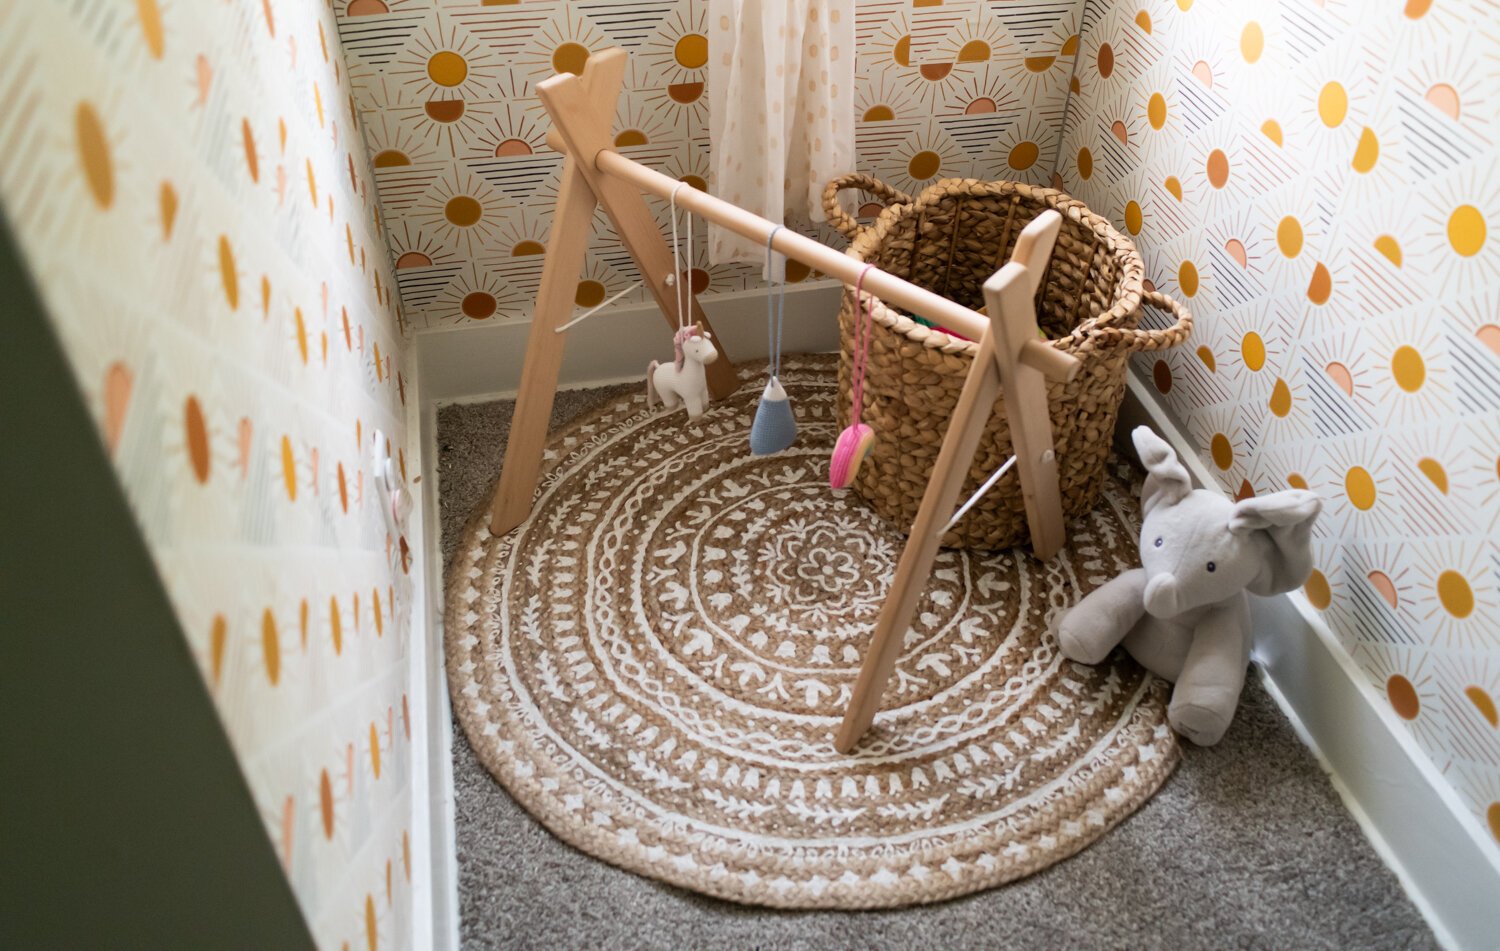 Poppy's room features a nook with peel and stick wallpaper.